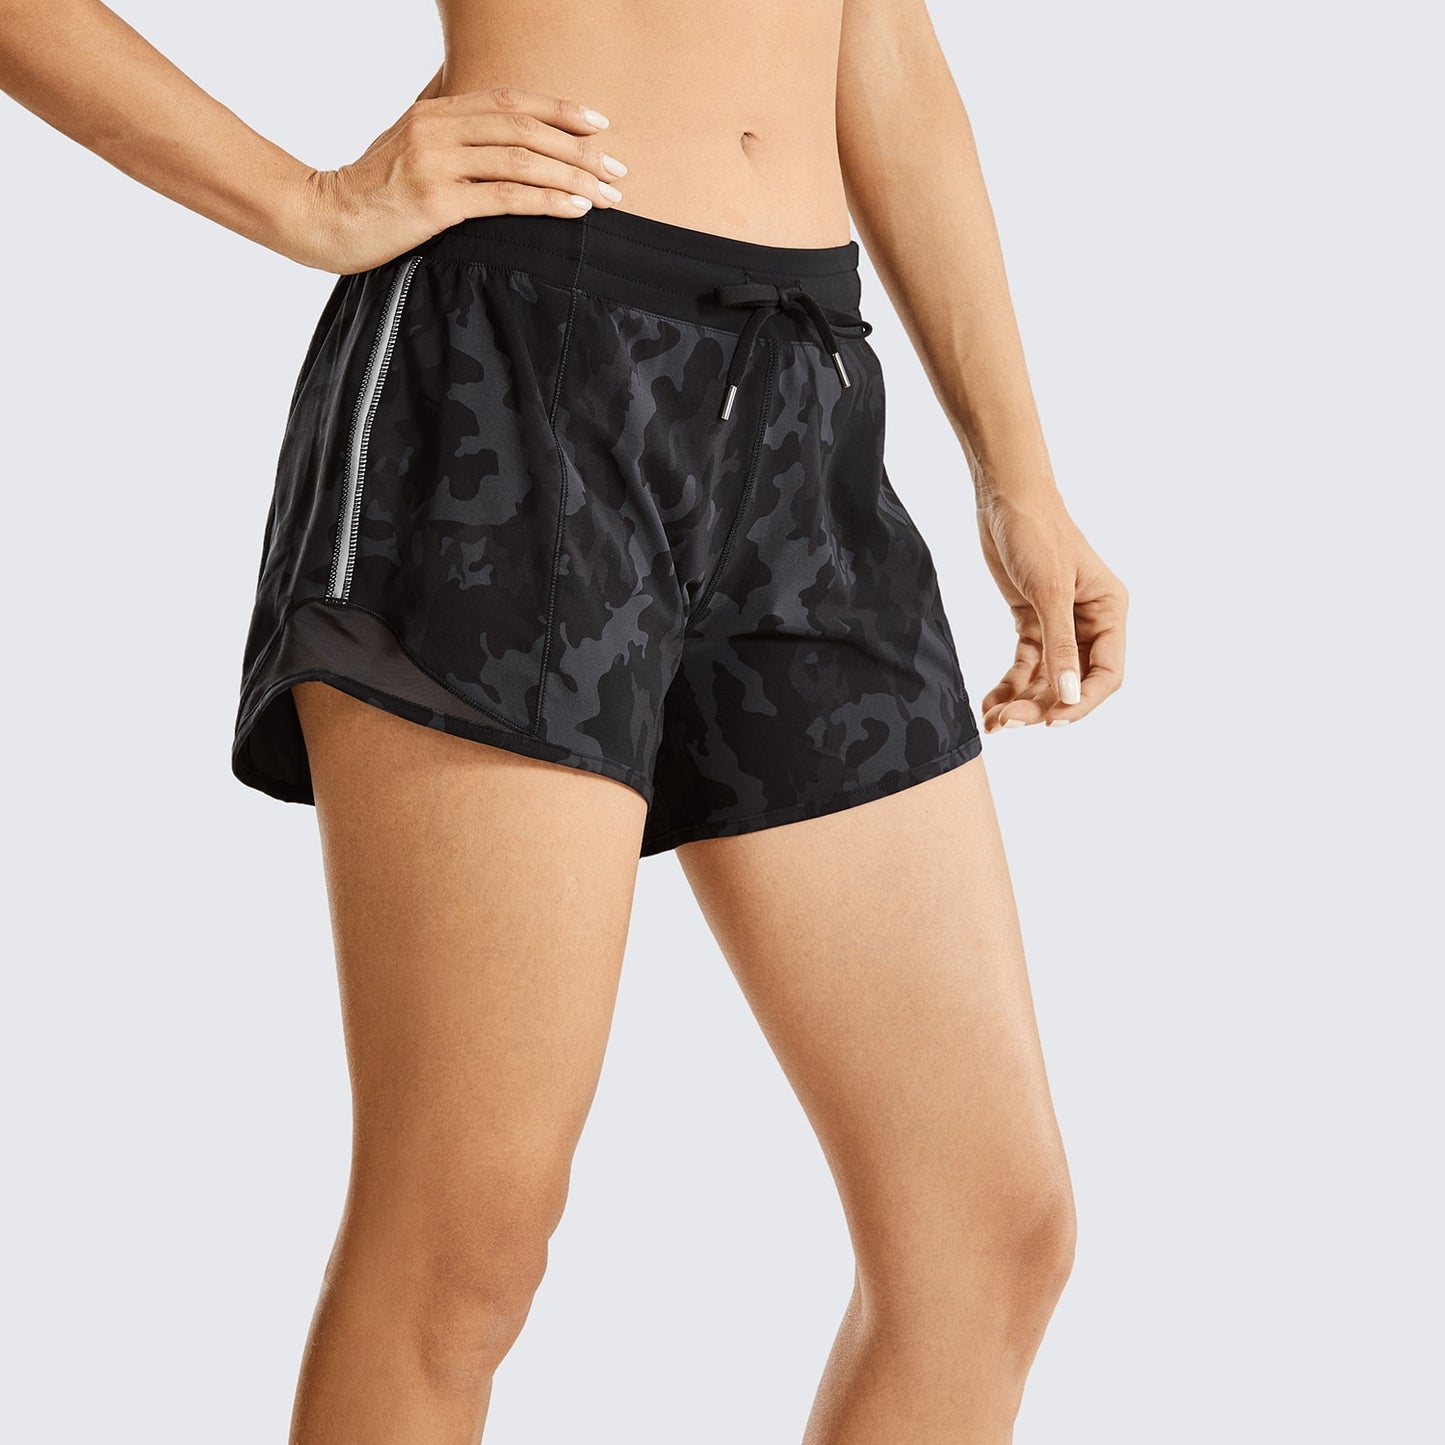 Athletic Running Shorts with Pocket